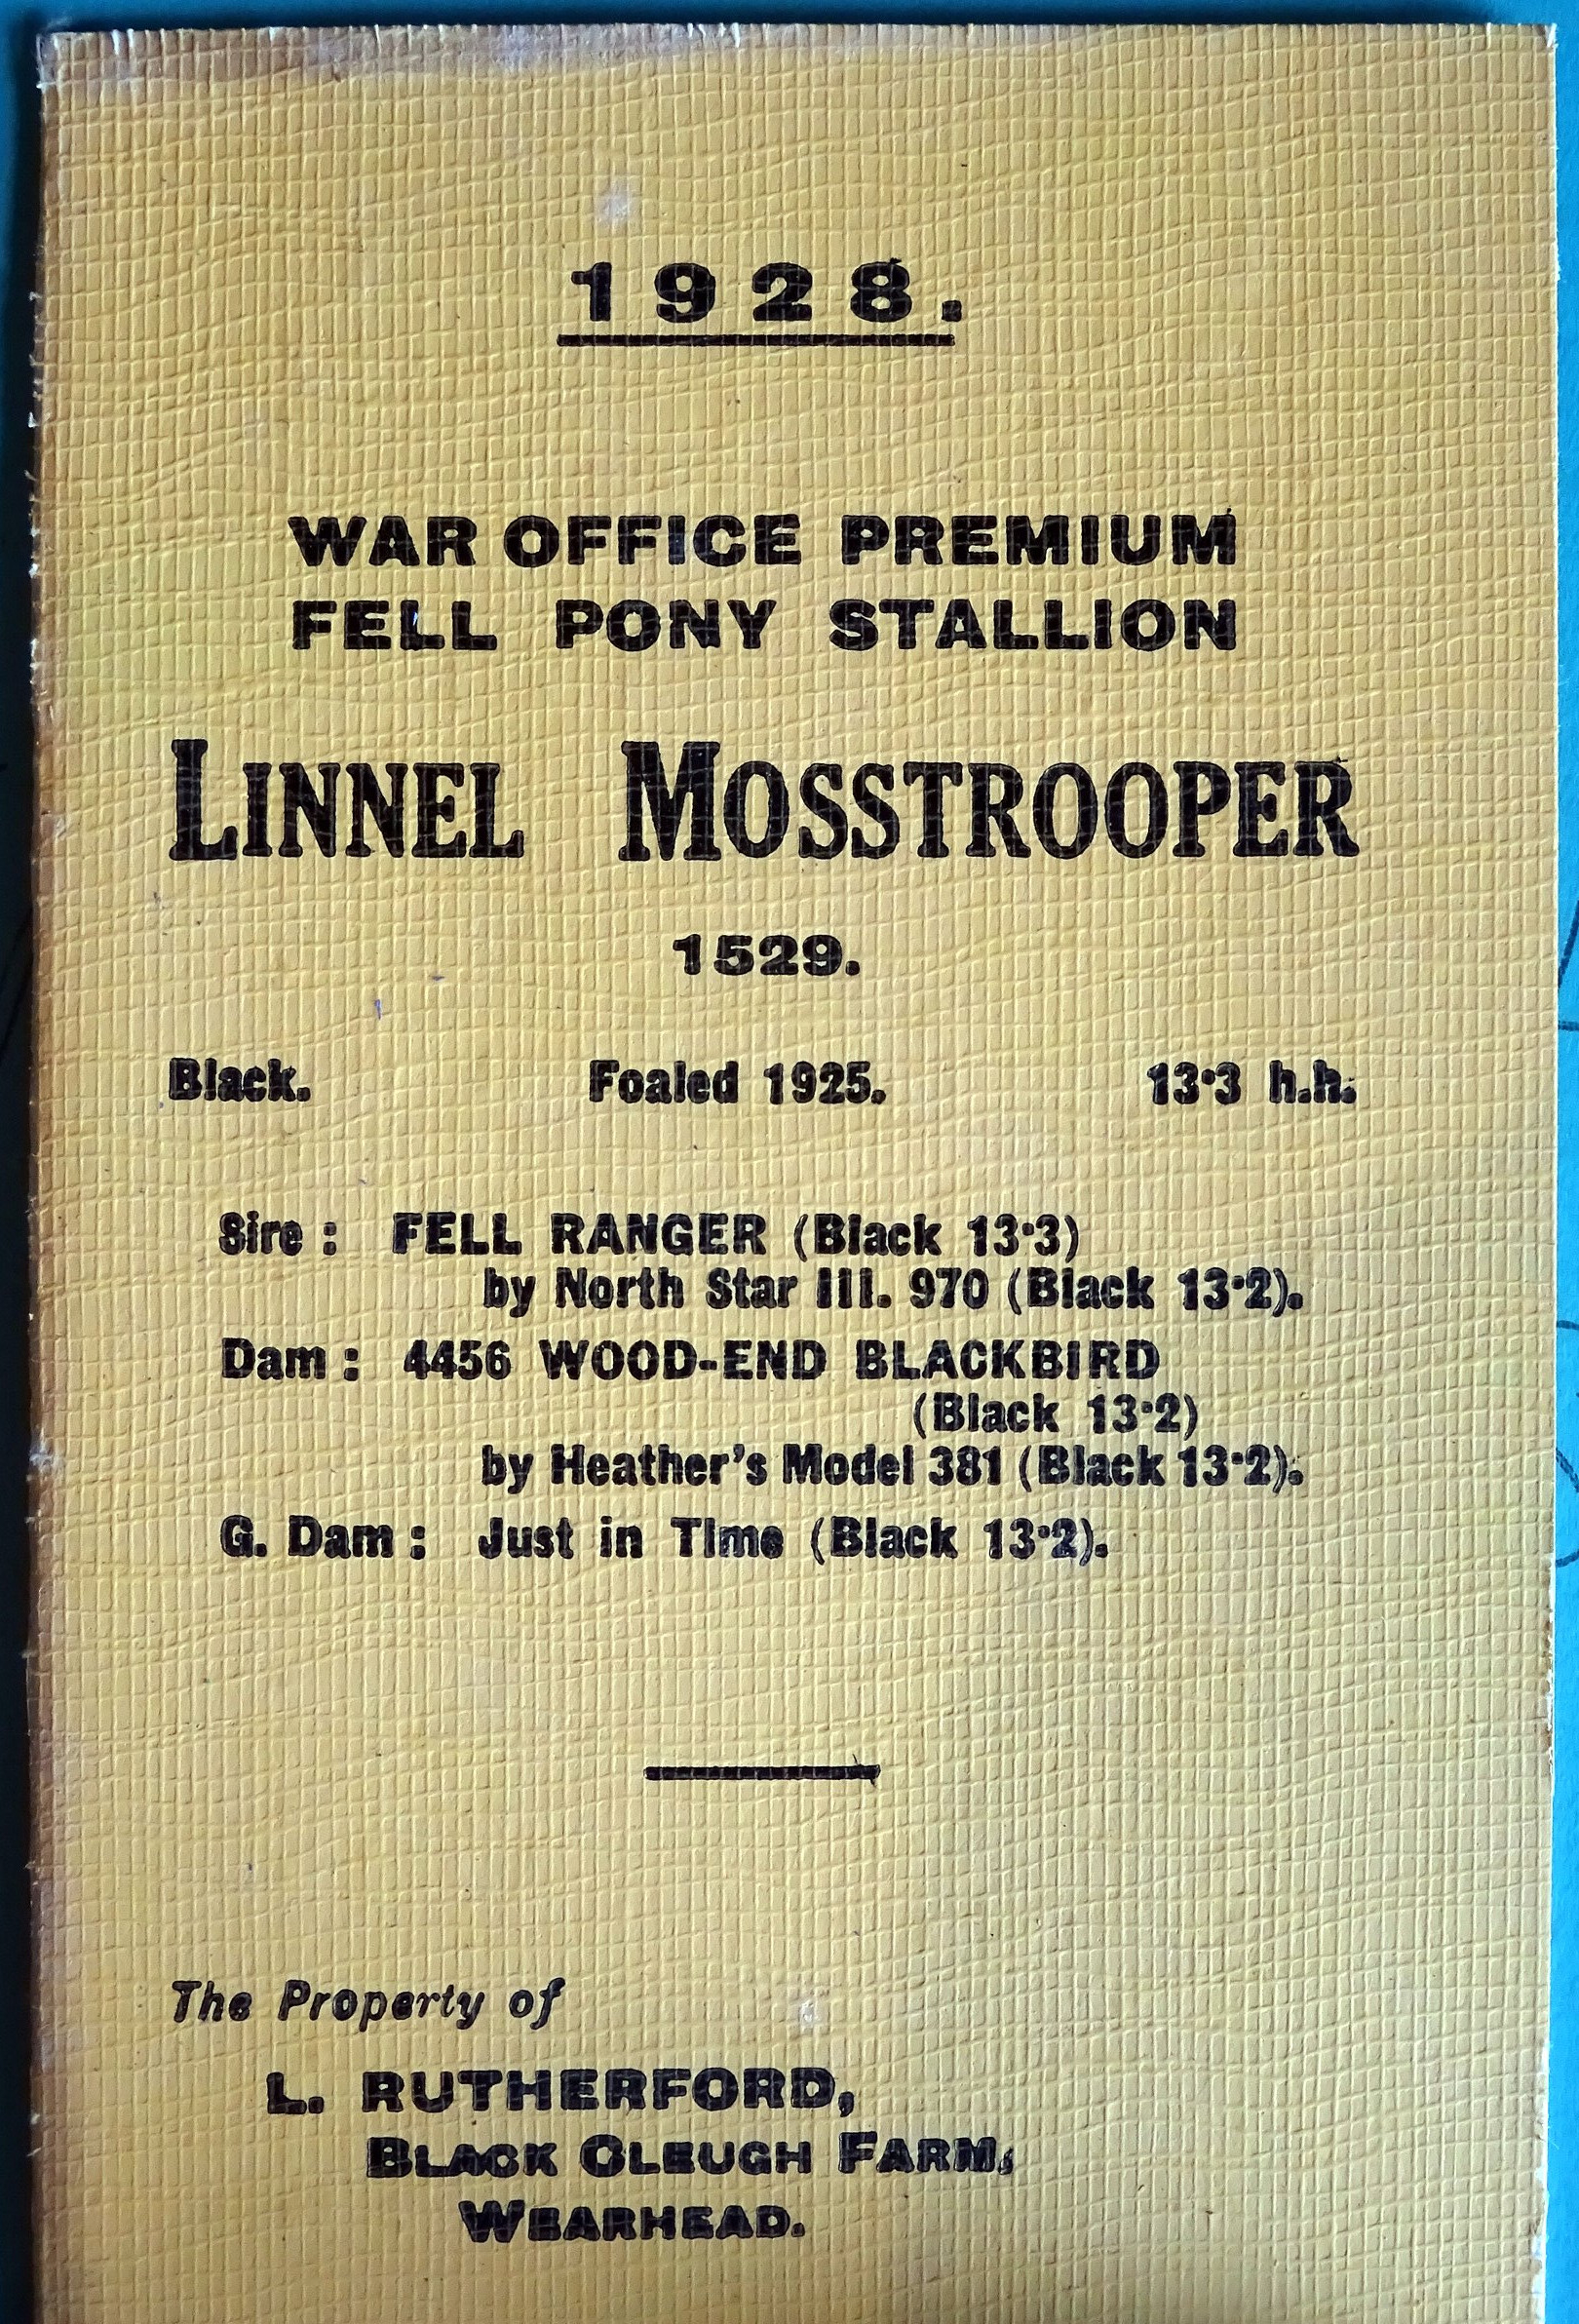 a card from 1928 advertising a stallion